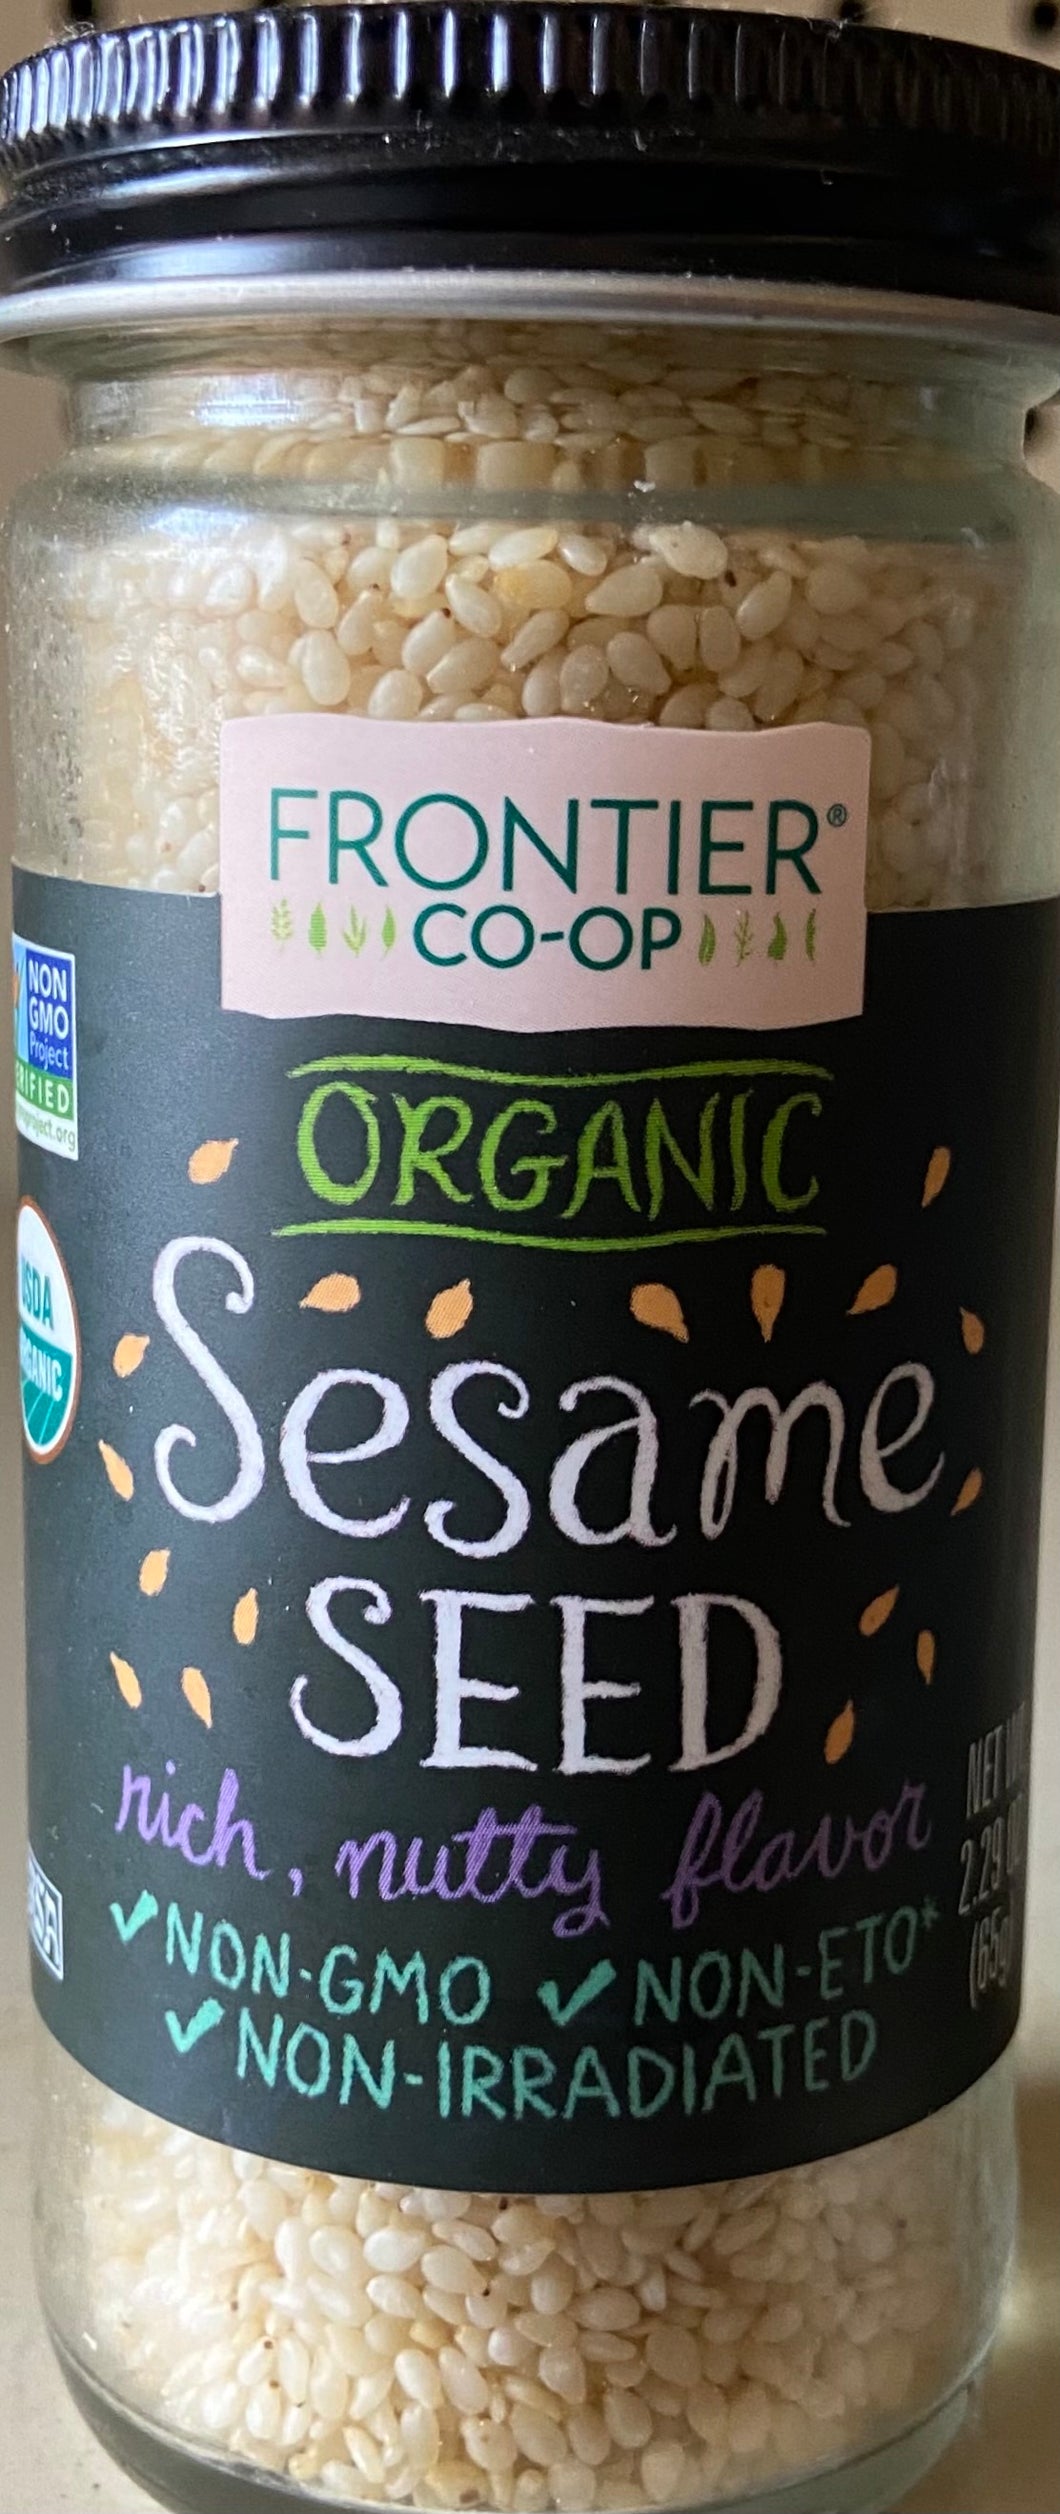 Sesame Seed, Organic, Front Co-Op